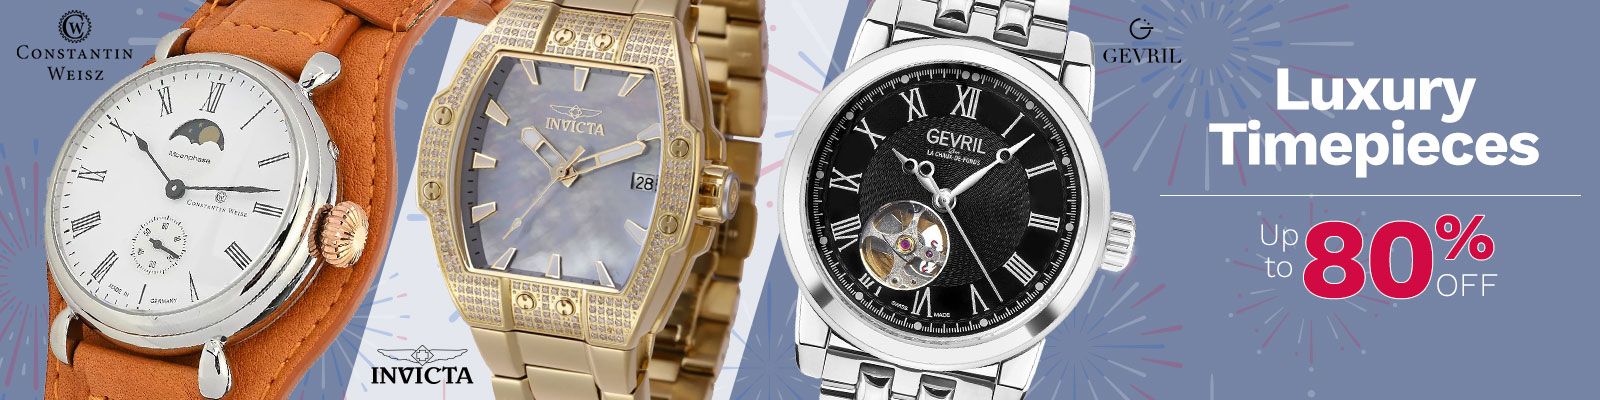 Luxury Timepieces  Elevate Your Style with Timeless Elegance Up to 80% Off 922-643, 925-420, 695-434